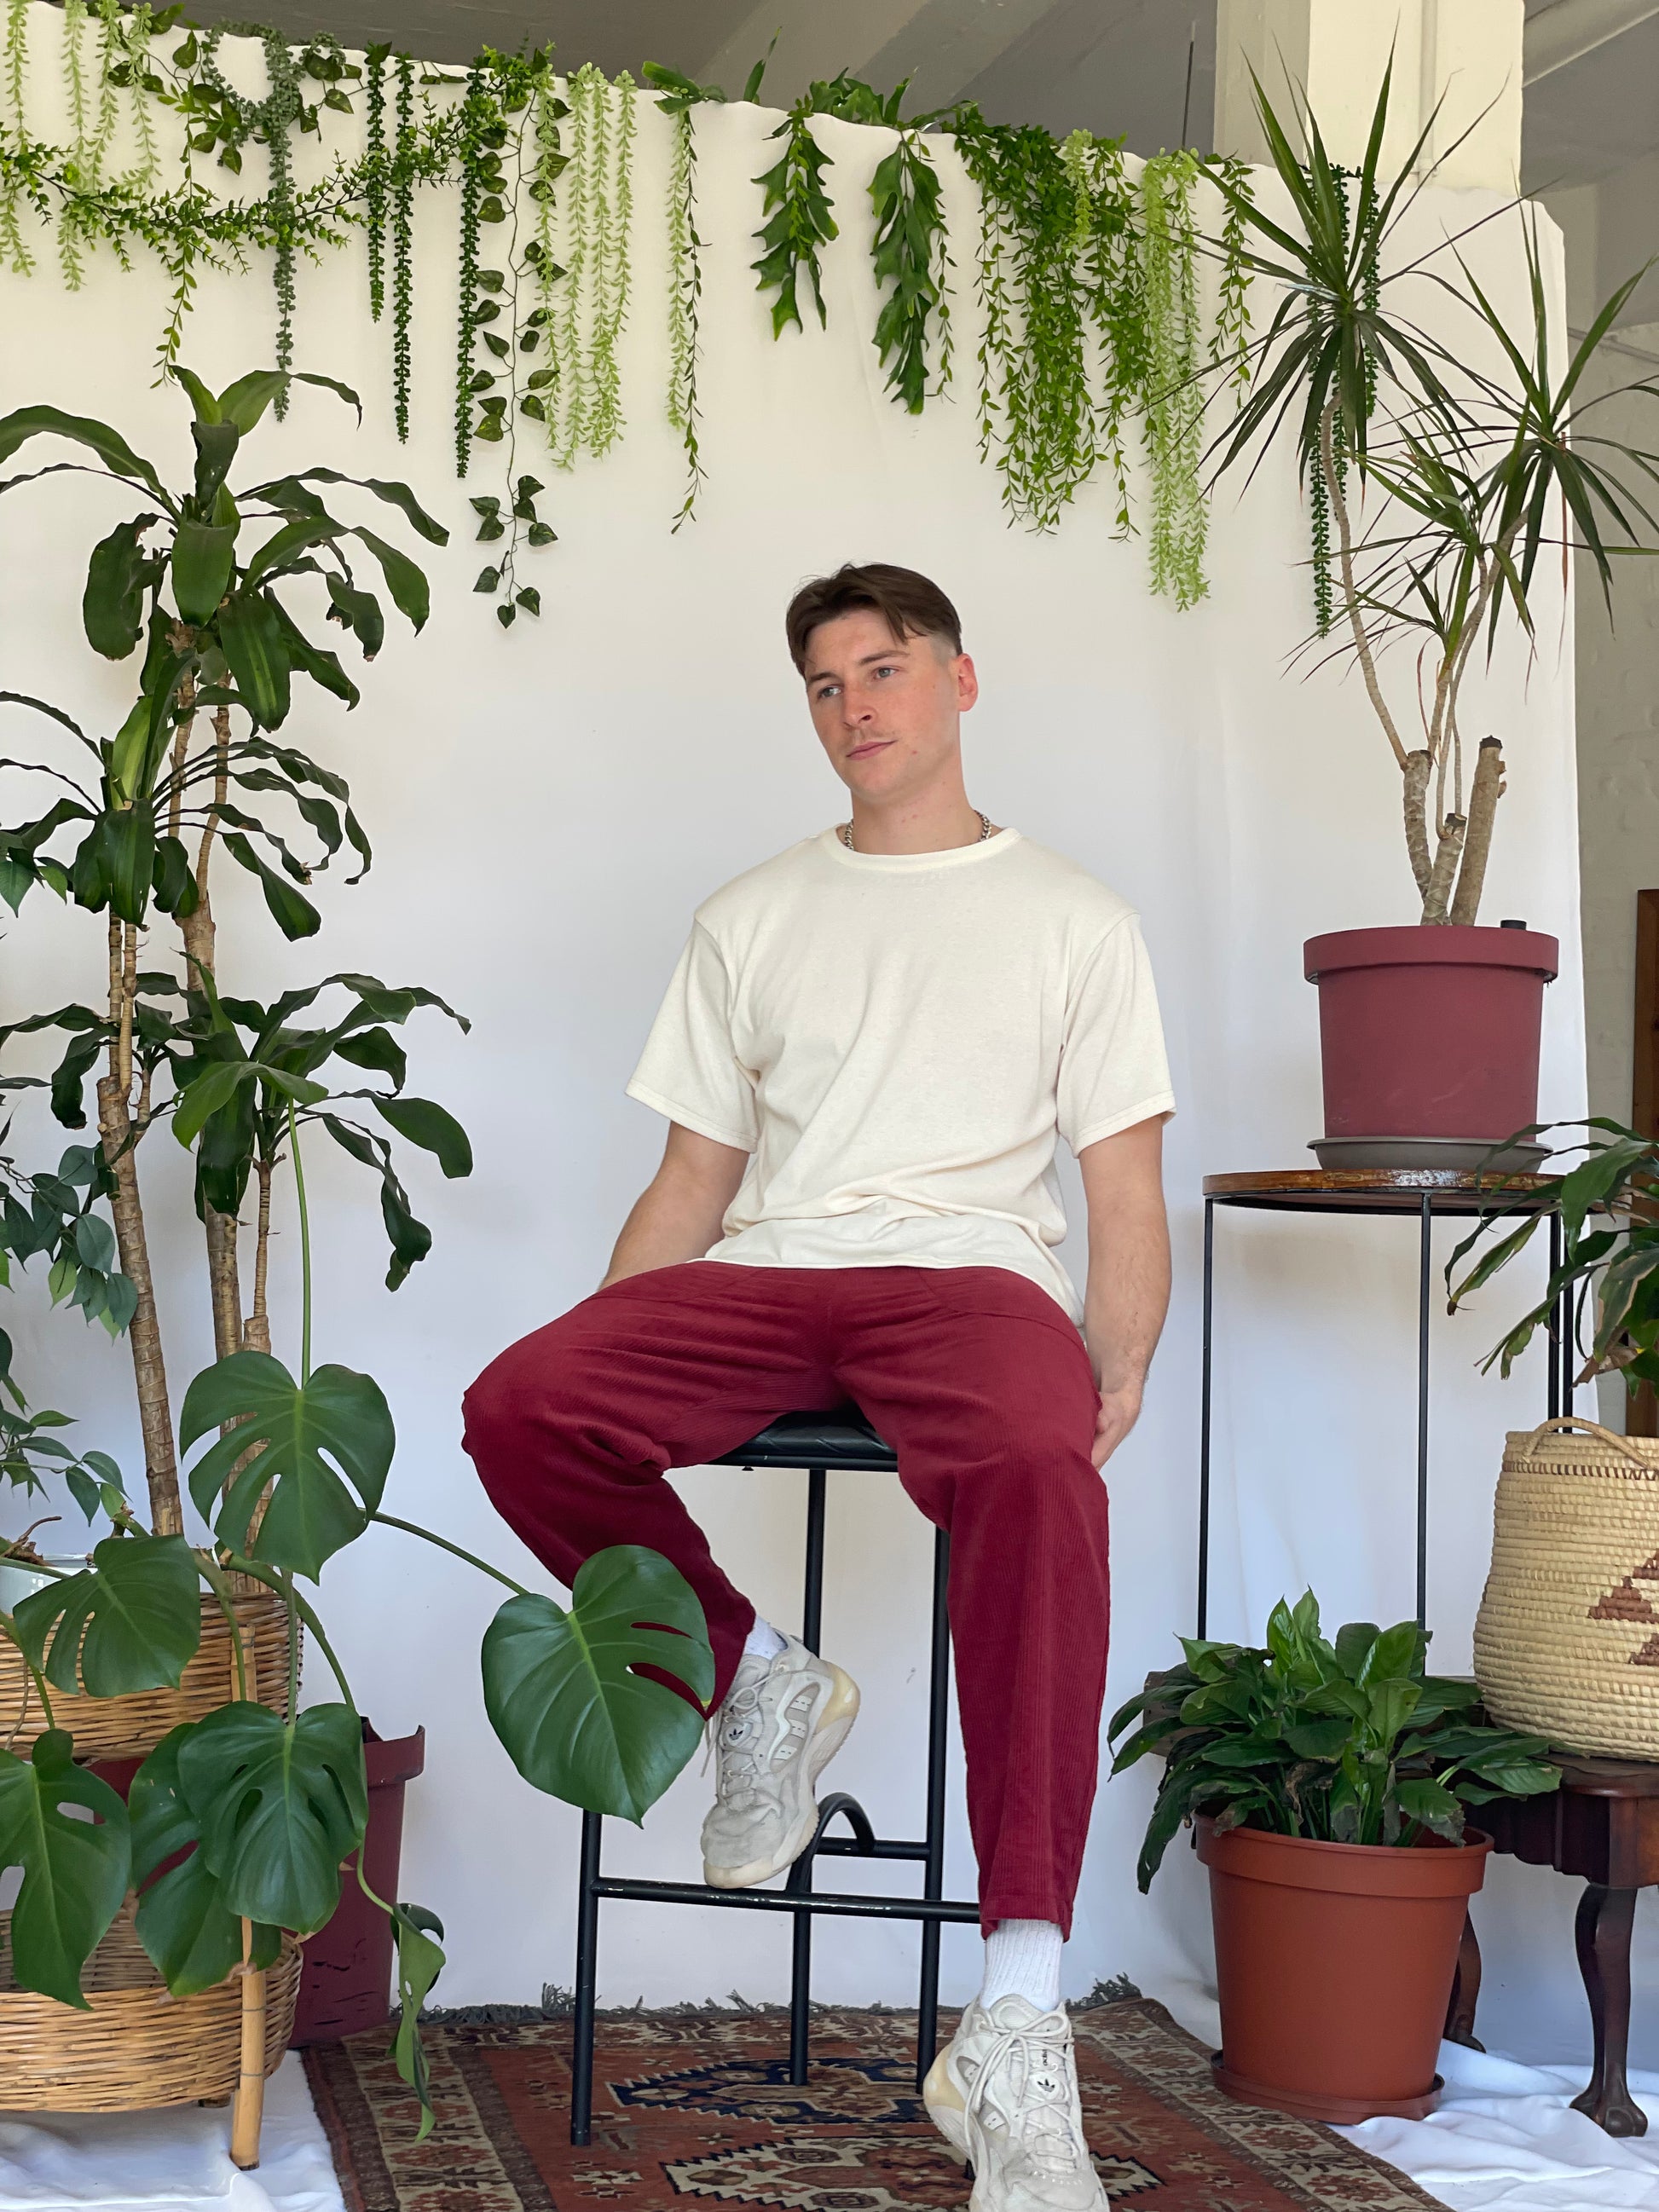 Model wears a cream t-shirt with burgundy corduroy pants and sneakers with their hands in pockets. The model is sitting on a stool against a white backdrop with plants and hanging foliage.